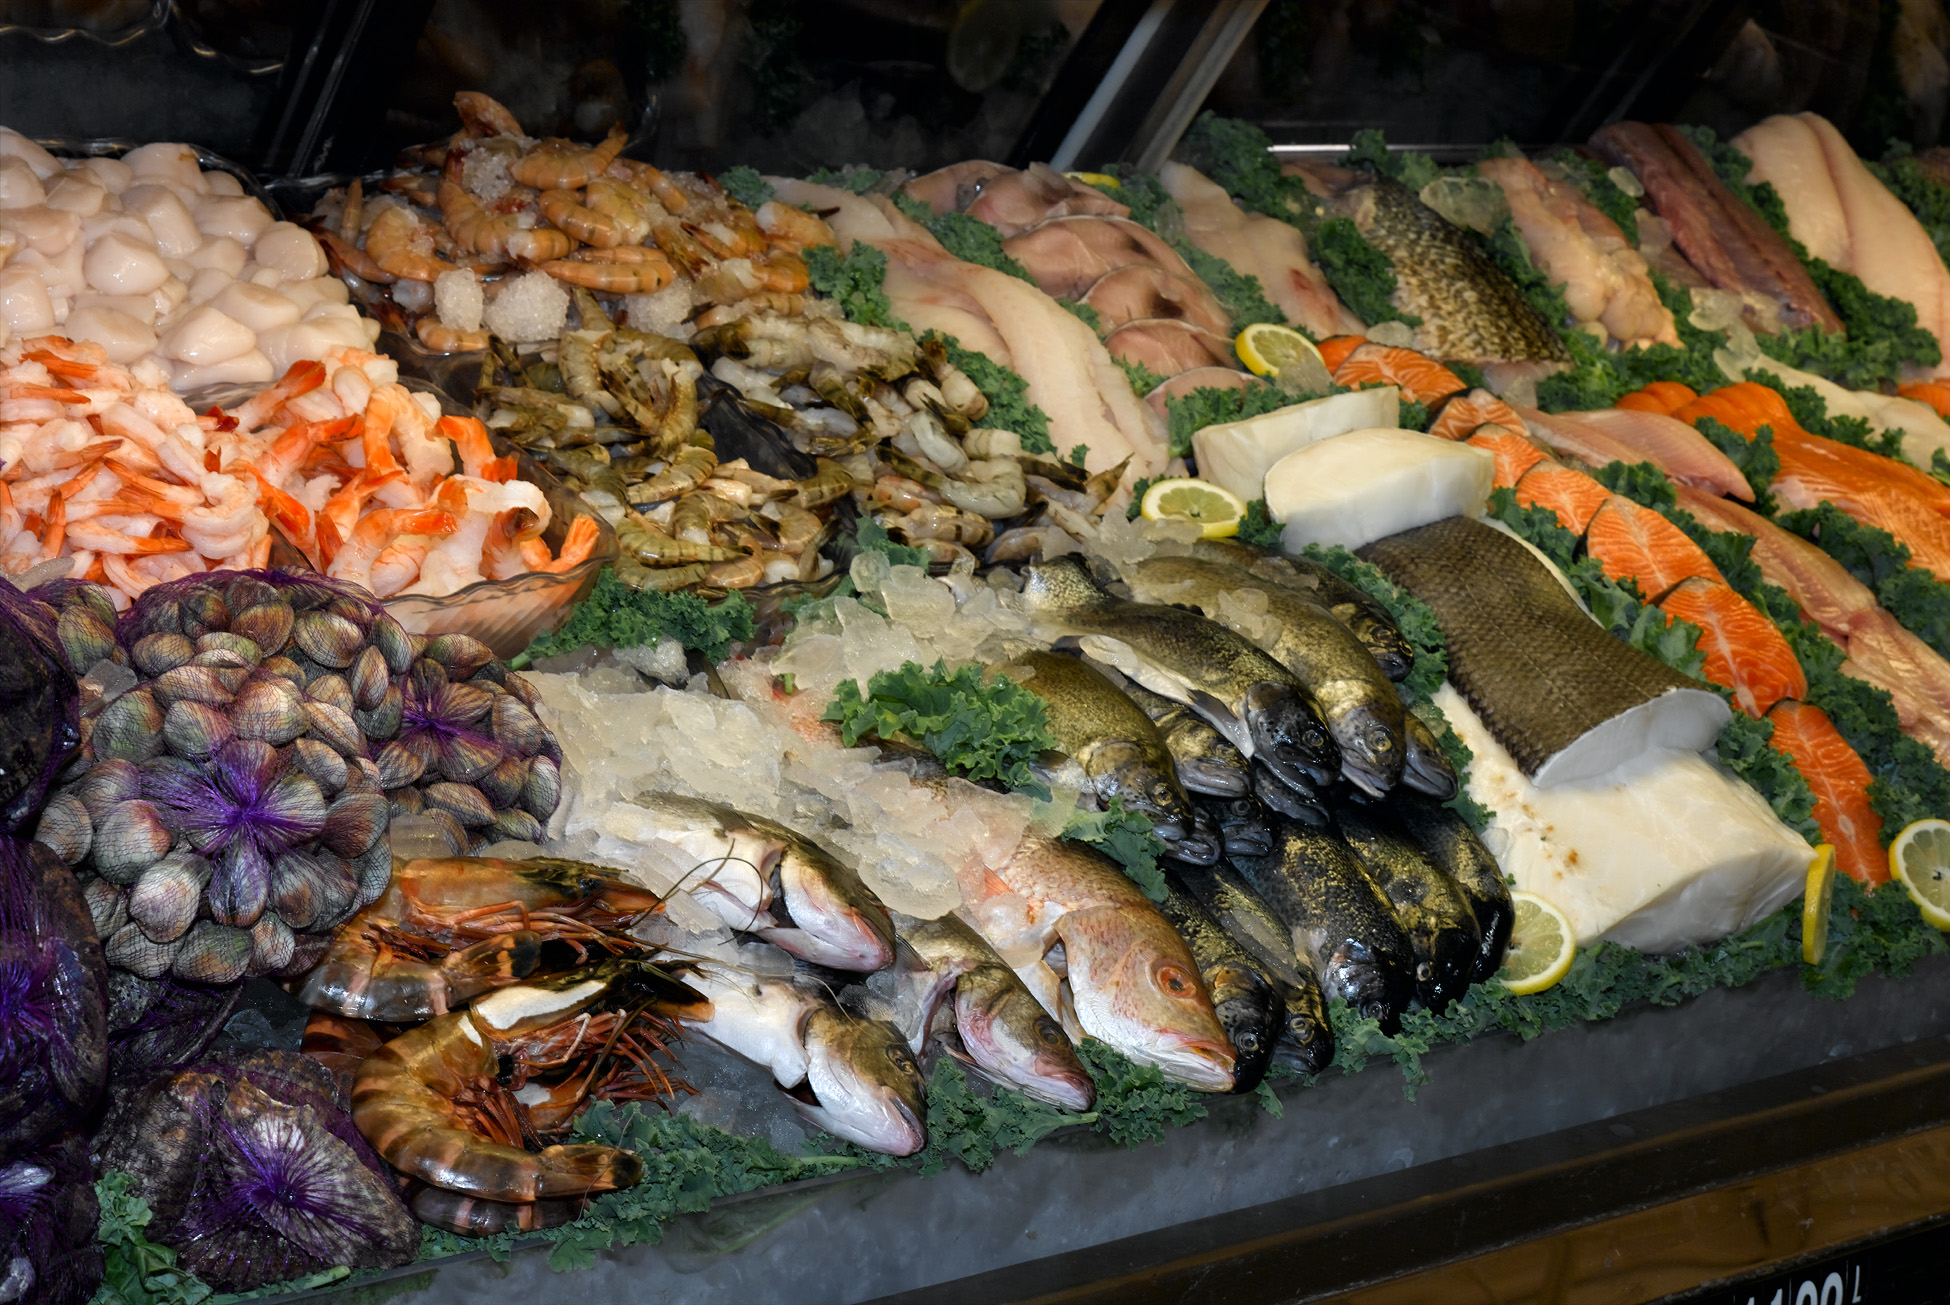 Over 100K Tons of Seafood Exported Last Year